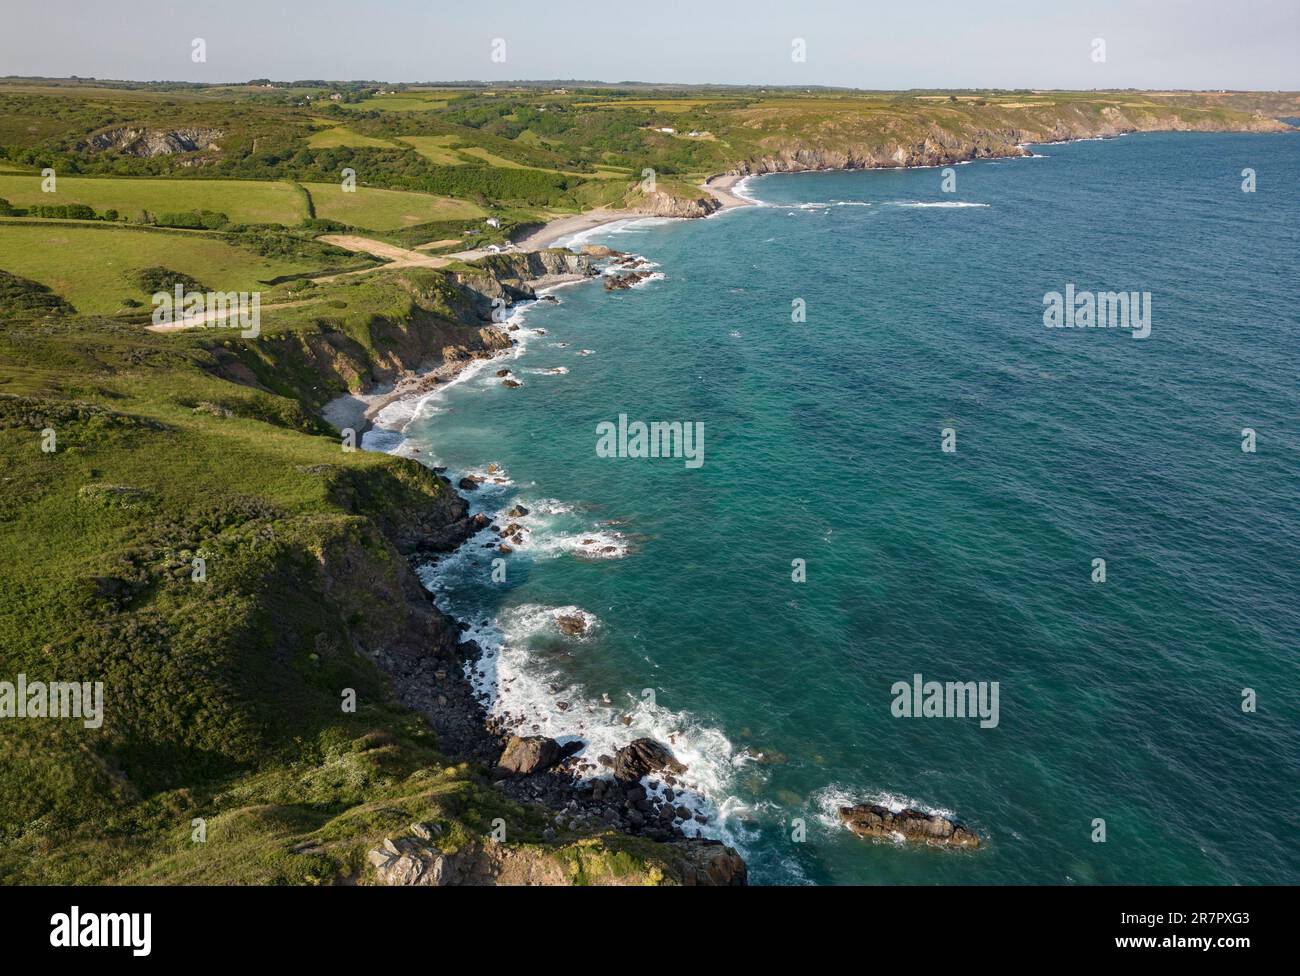 Aerial view of the rugged south Cornwall coastline near the village of Kuggar with the clear ocean breaking on the rocks. Stock Photo